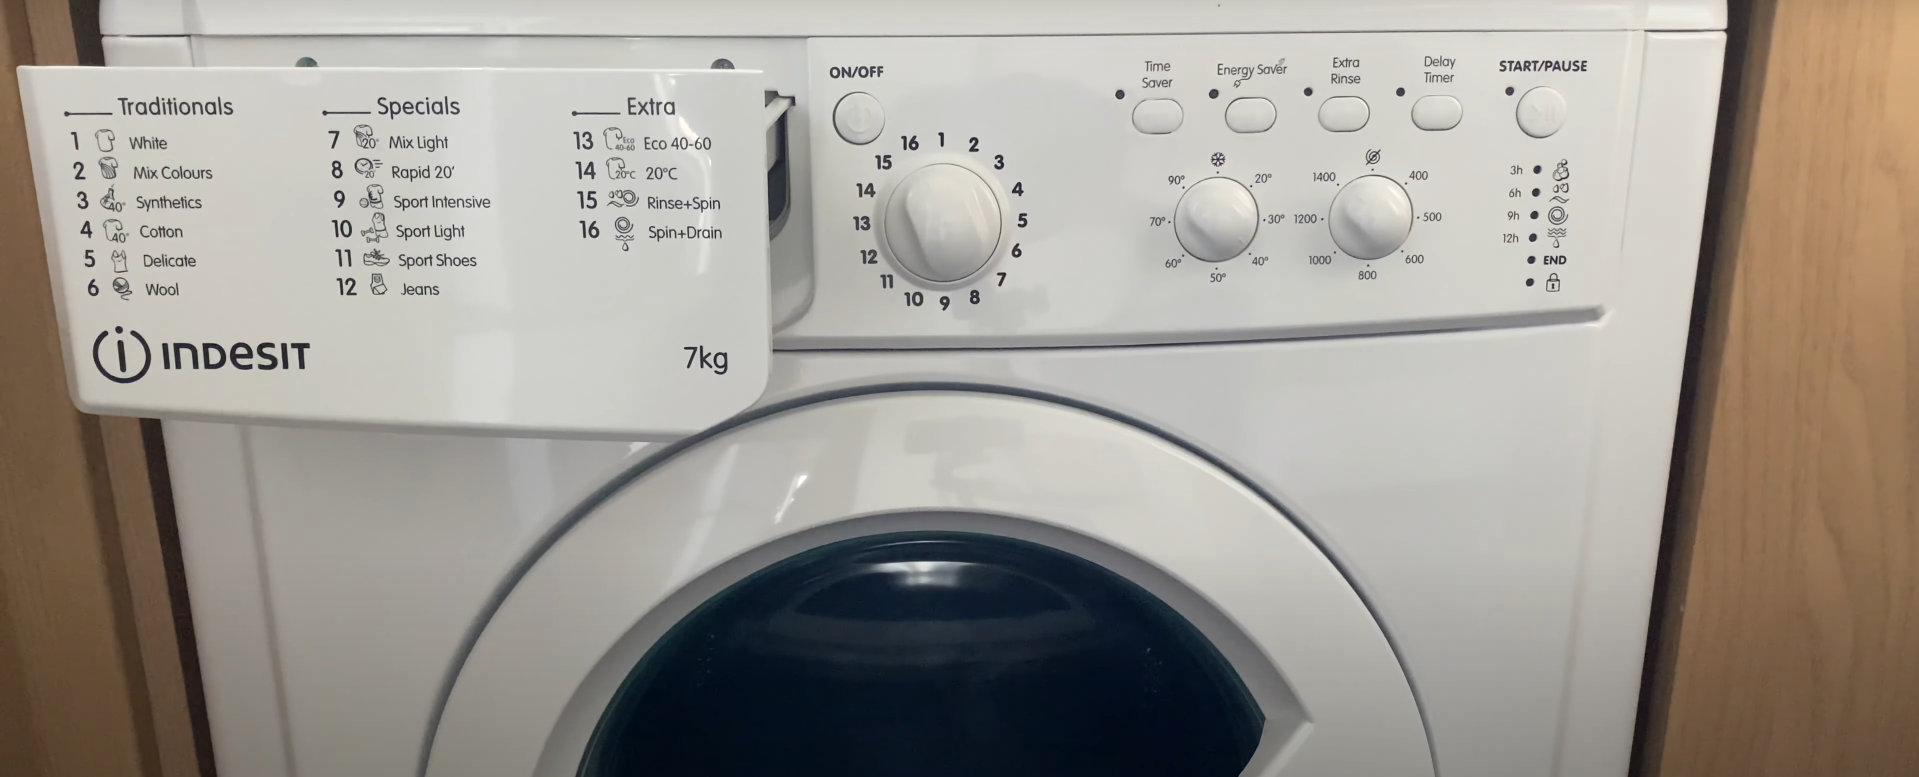 Indesit Washing Machine with soap tray open